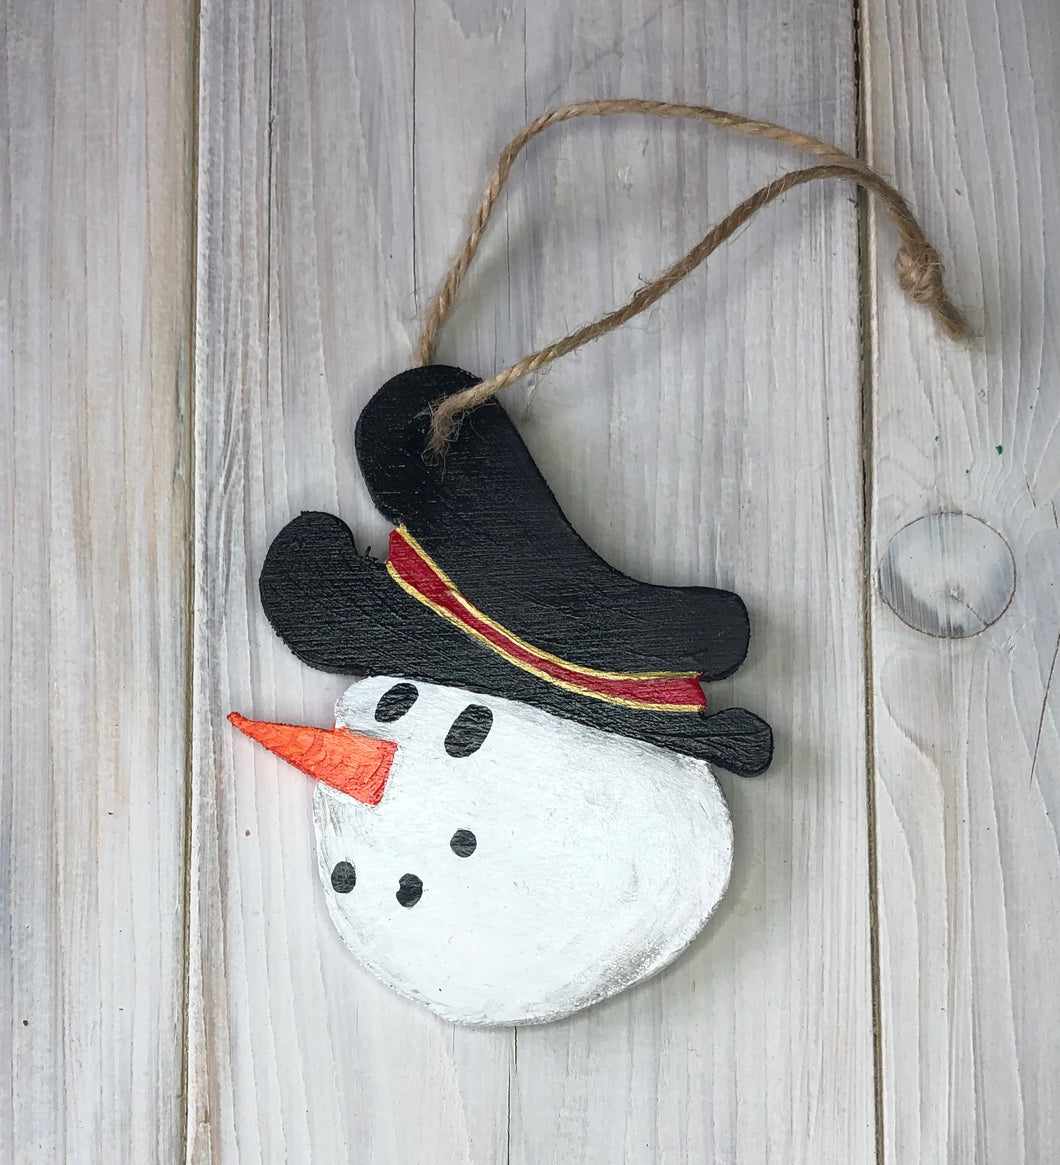 Handcrafted Snowman Christmas decoration.